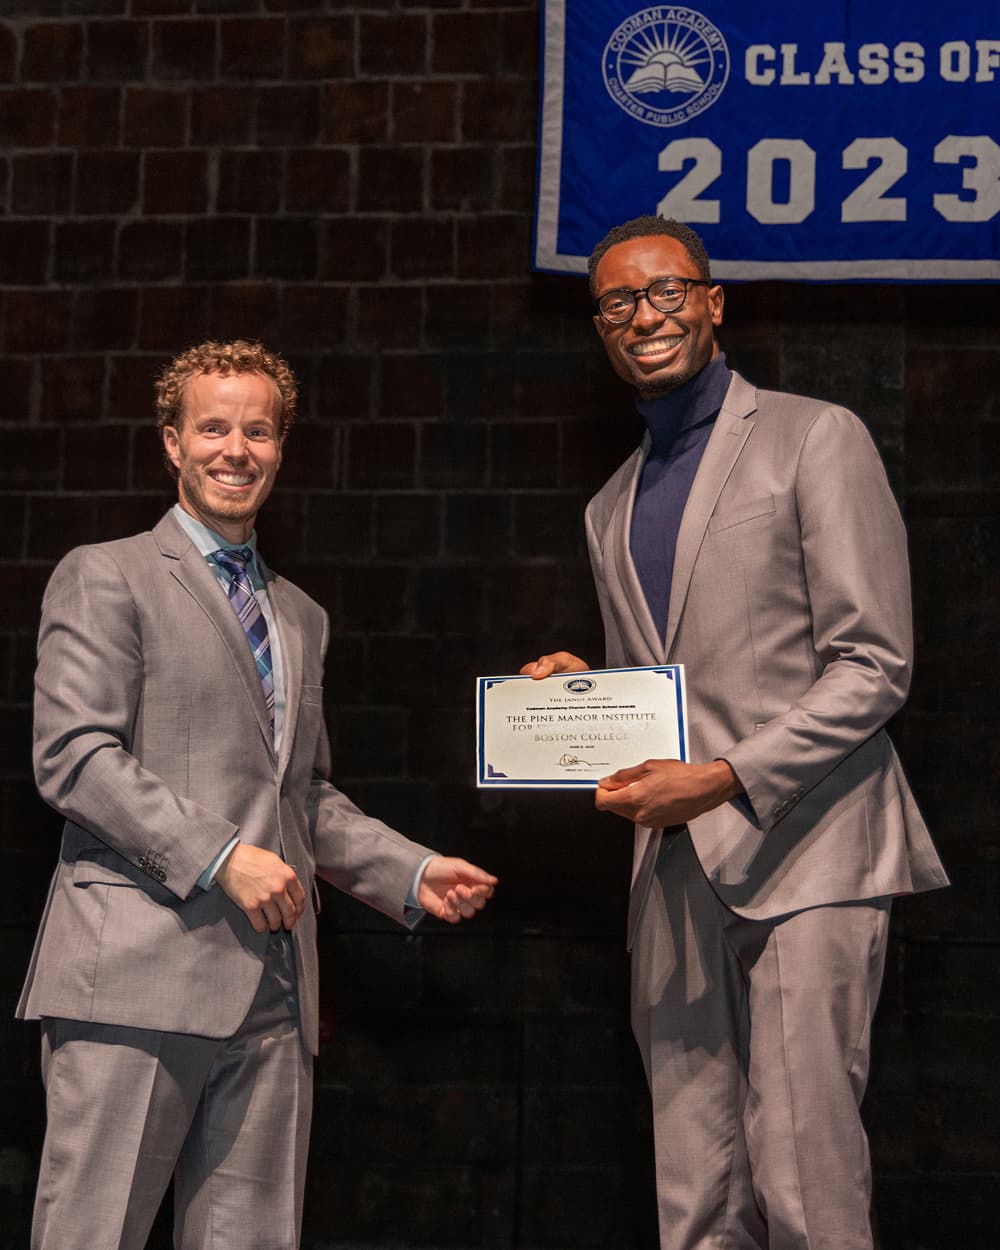 Brian U. Nwafor (at right), assistant director of The Academy at BC's Pine Manor Institute for Student Success, accepts the award from Daniel Hoffman, dean of college and career advising at Codman Academy.